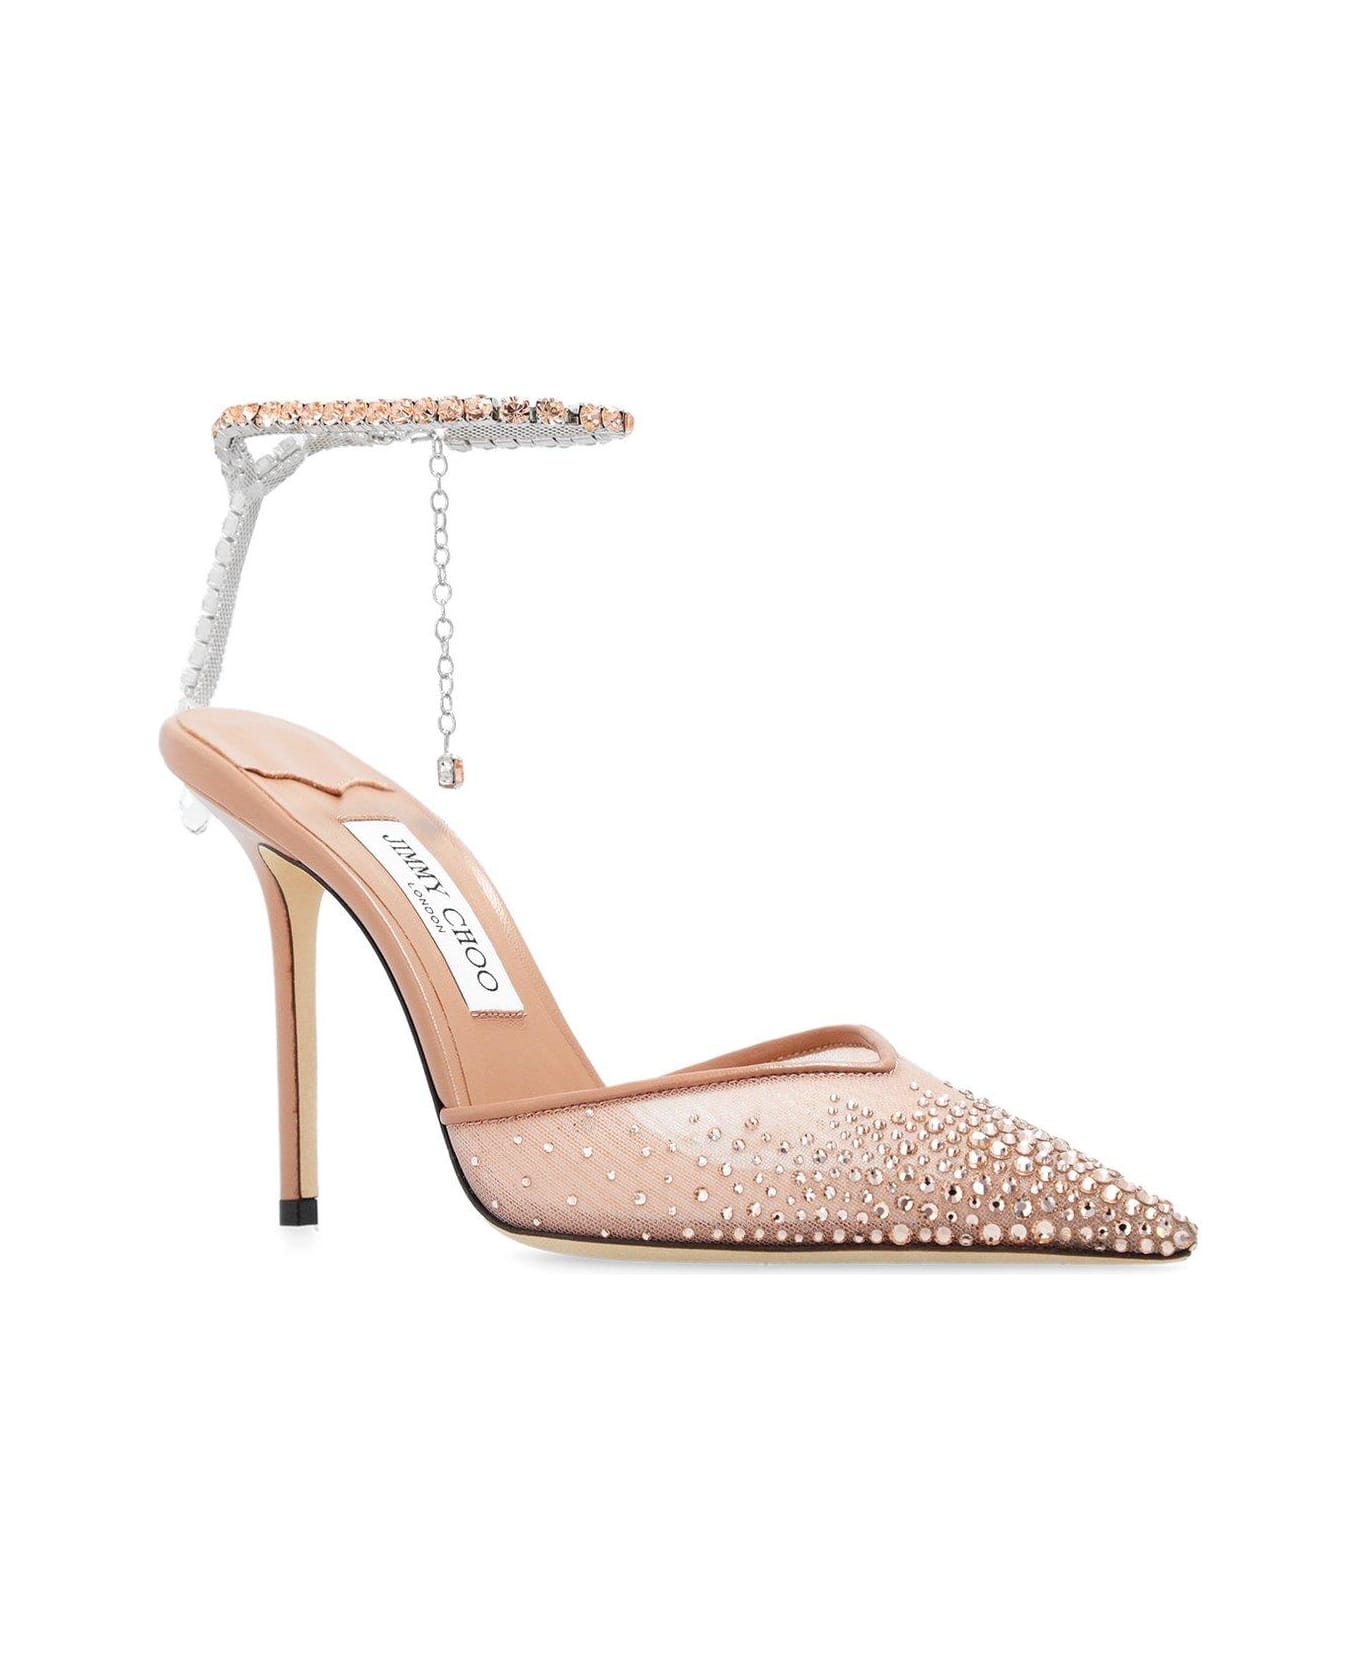 Jimmy Choo Embellished Pointed-toe Pumps - Cipria